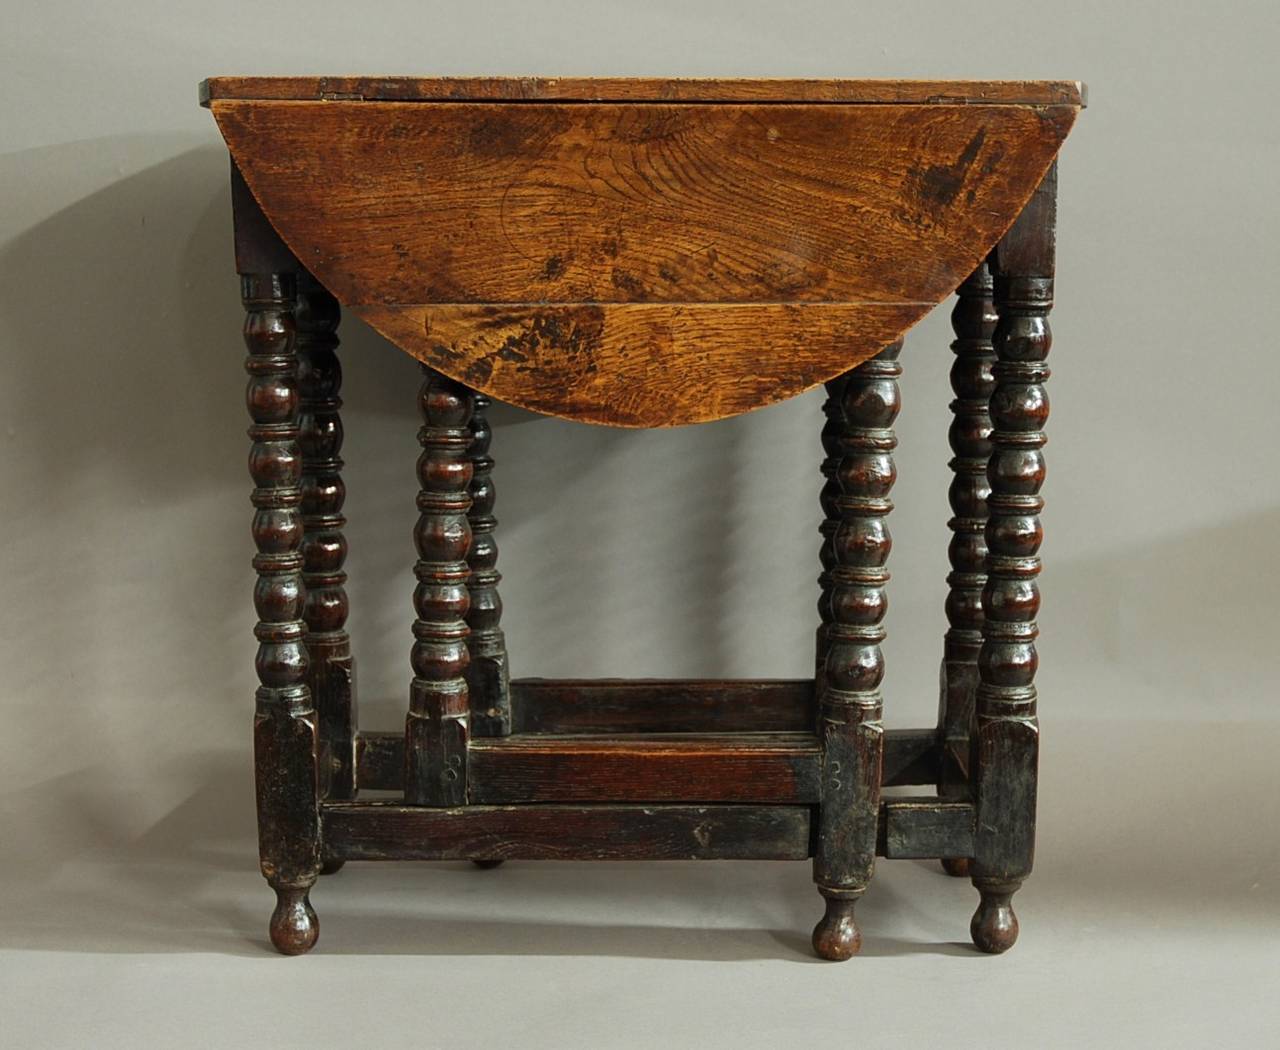 William and Mary Rare 17th Century Gateleg Table of Small Proportions